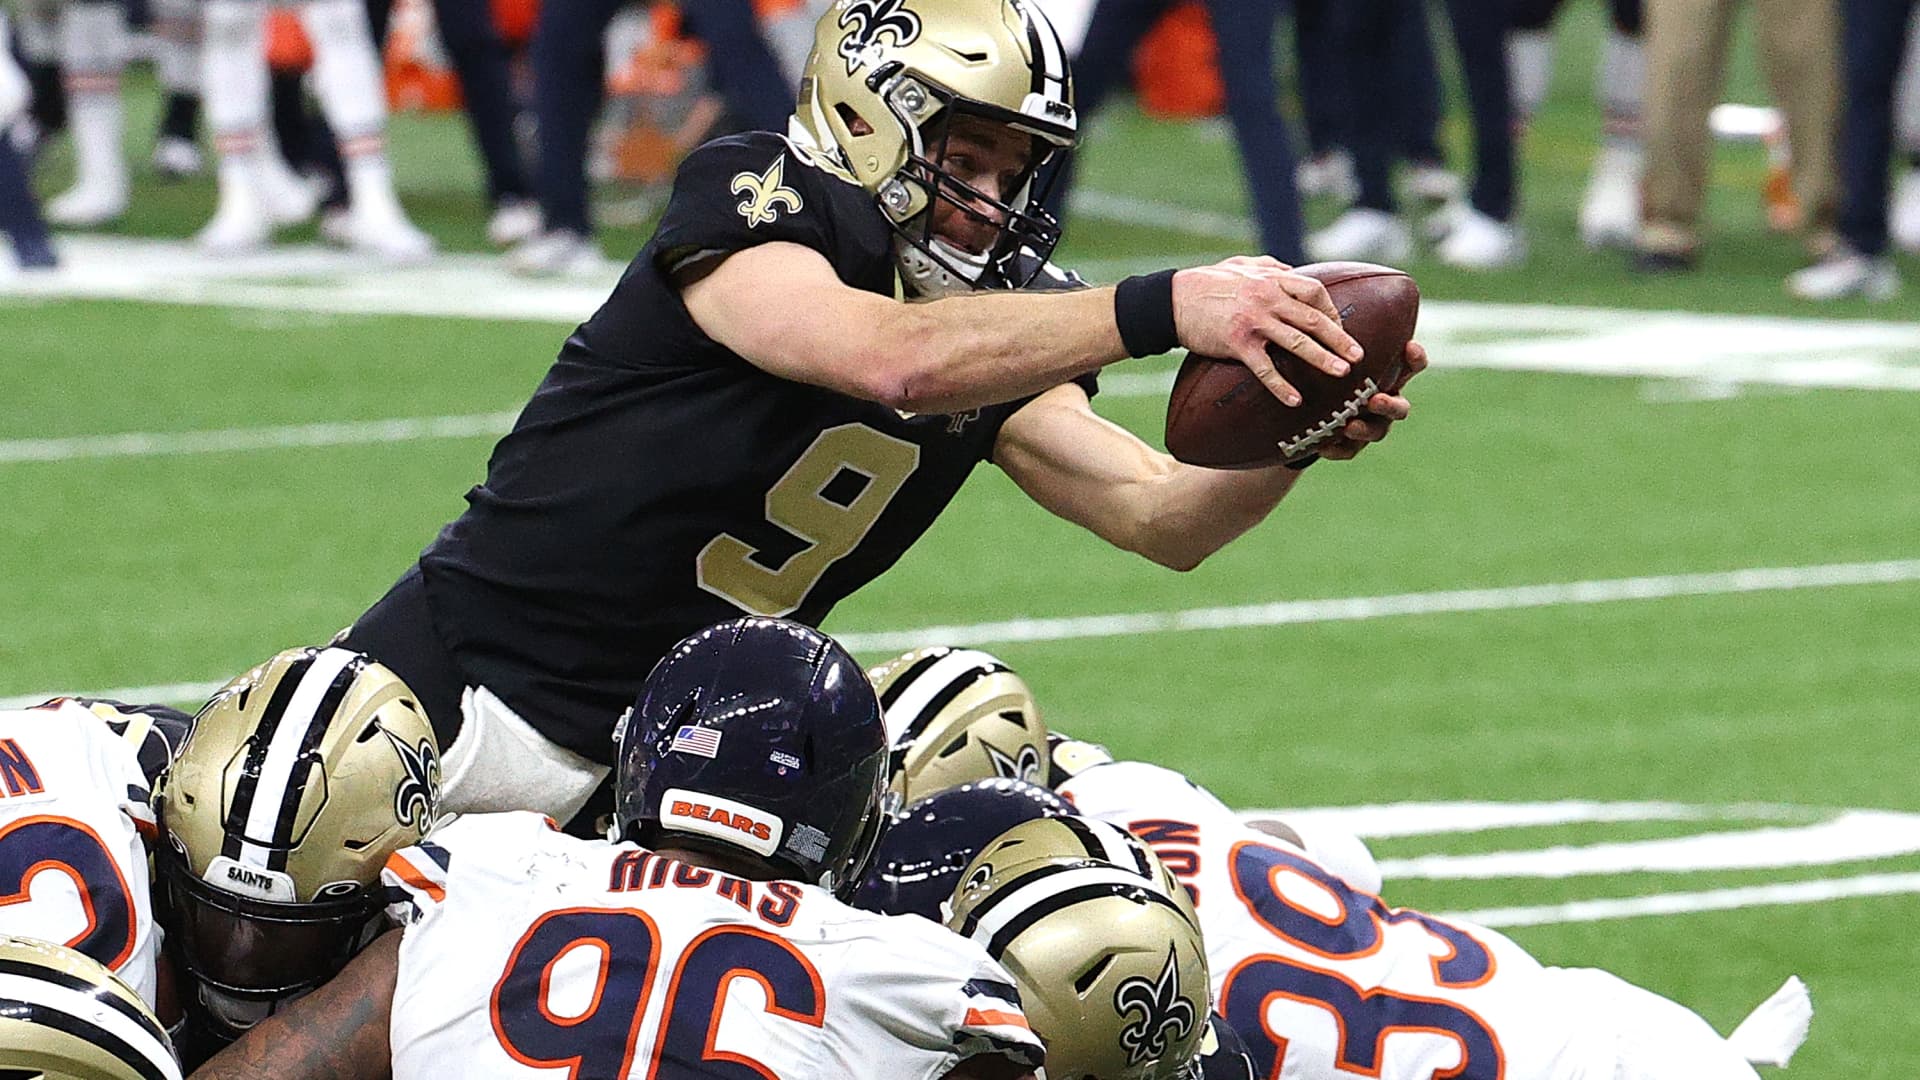 Drew Brees #9 of the New Orleans Saints dives in the end zone to score a one yard touchdown against the Chicago Bears during the fourth quarter in the NFC Wild Card Playoff game at Mercedes Benz Superdome on January 10, 2021 in New Orleans, Louisiana.